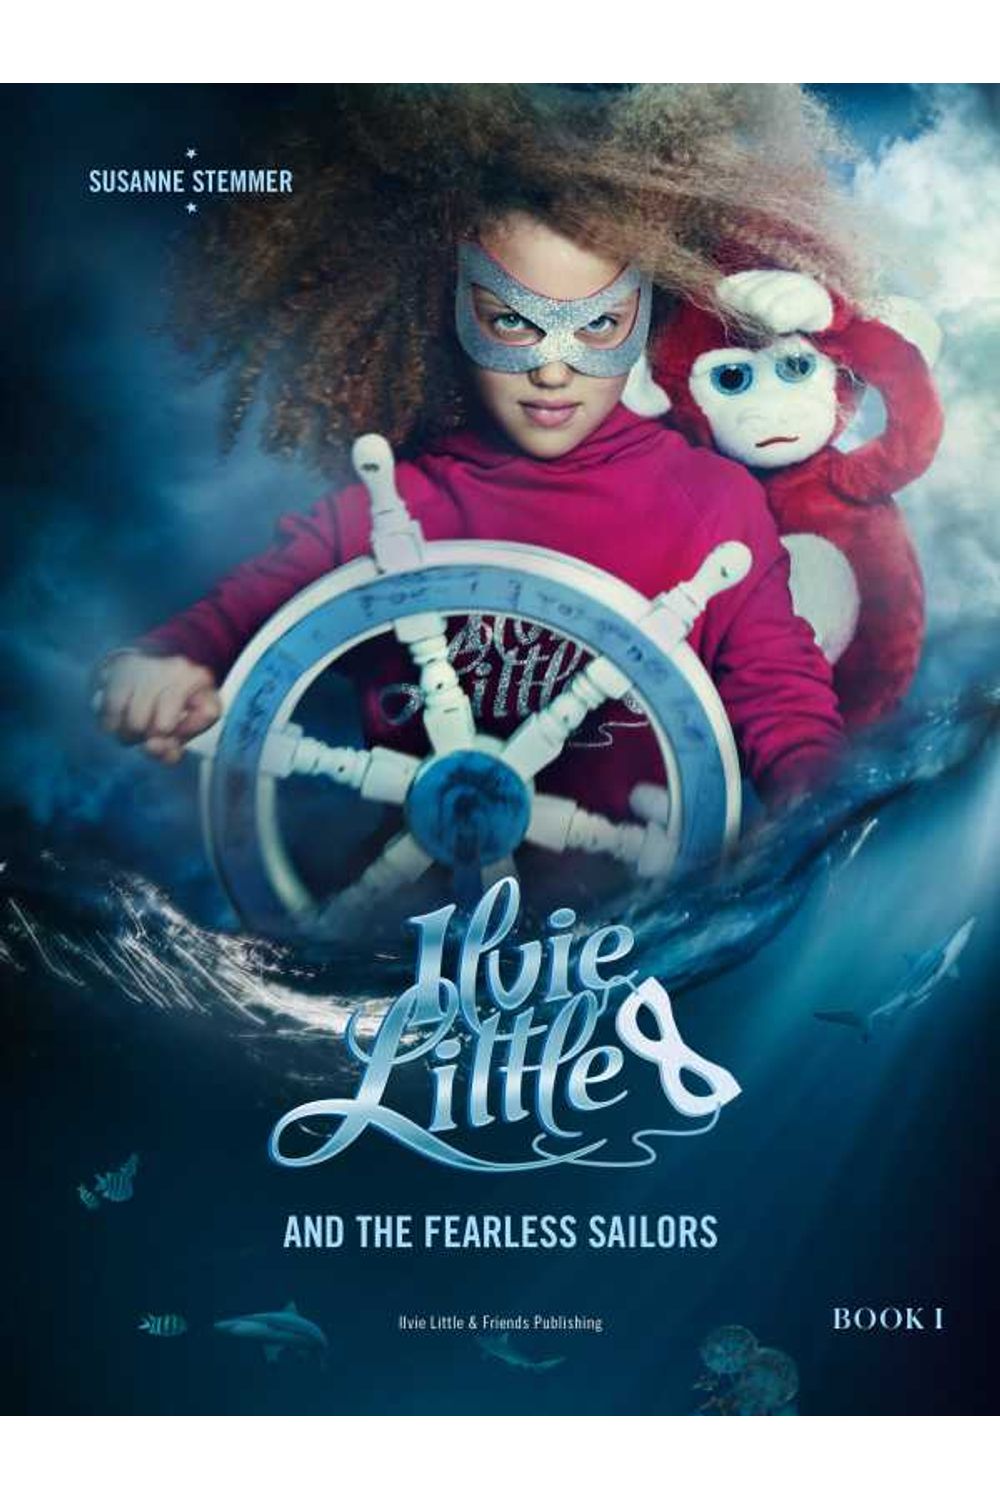 bw-ilvie-little-and-the-fearless-sailors-ilvie-little-friends-gmbh-9783903490048